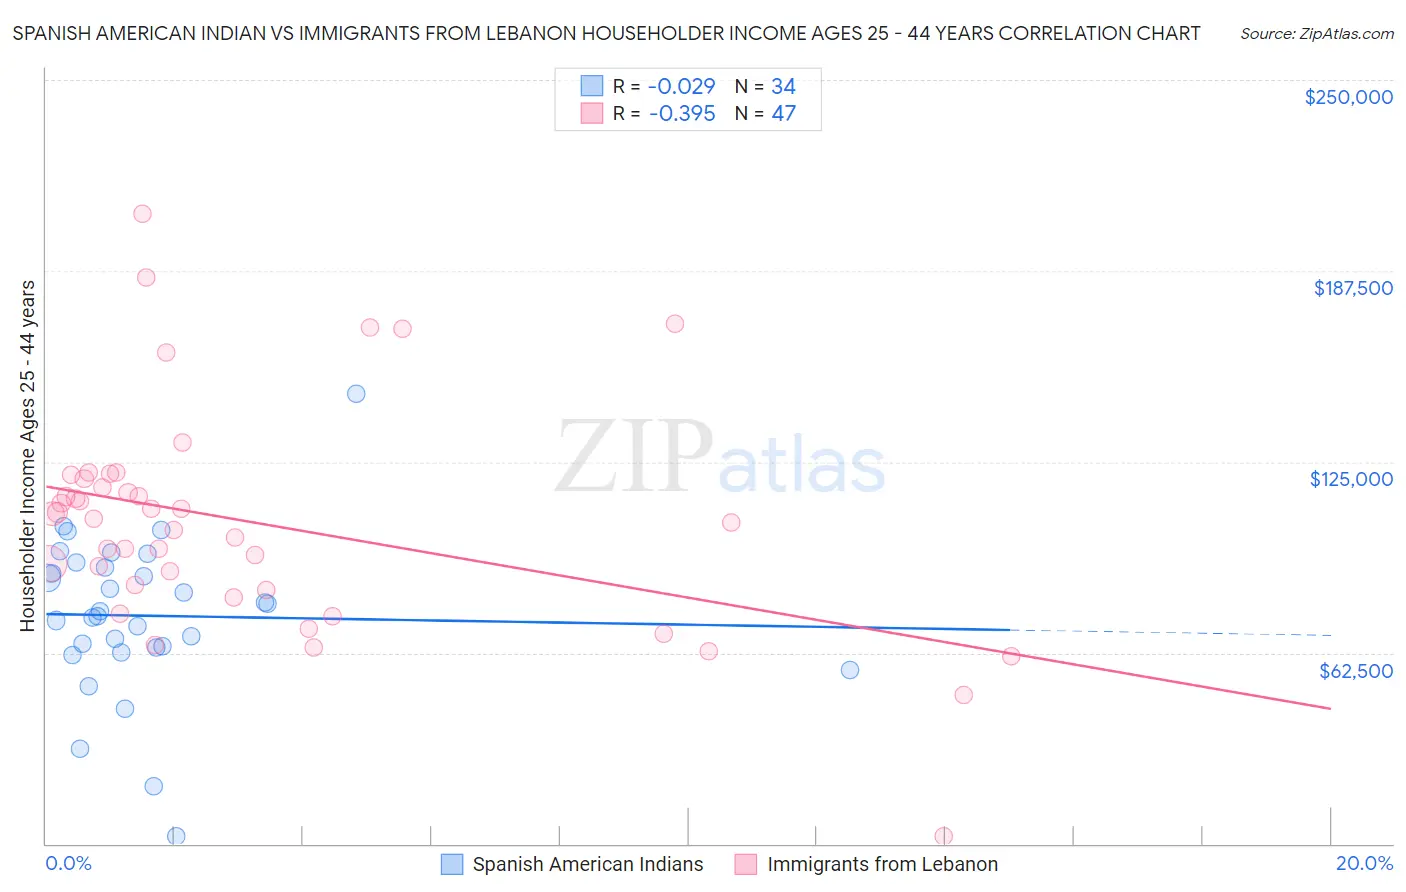 Spanish American Indian vs Immigrants from Lebanon Householder Income Ages 25 - 44 years